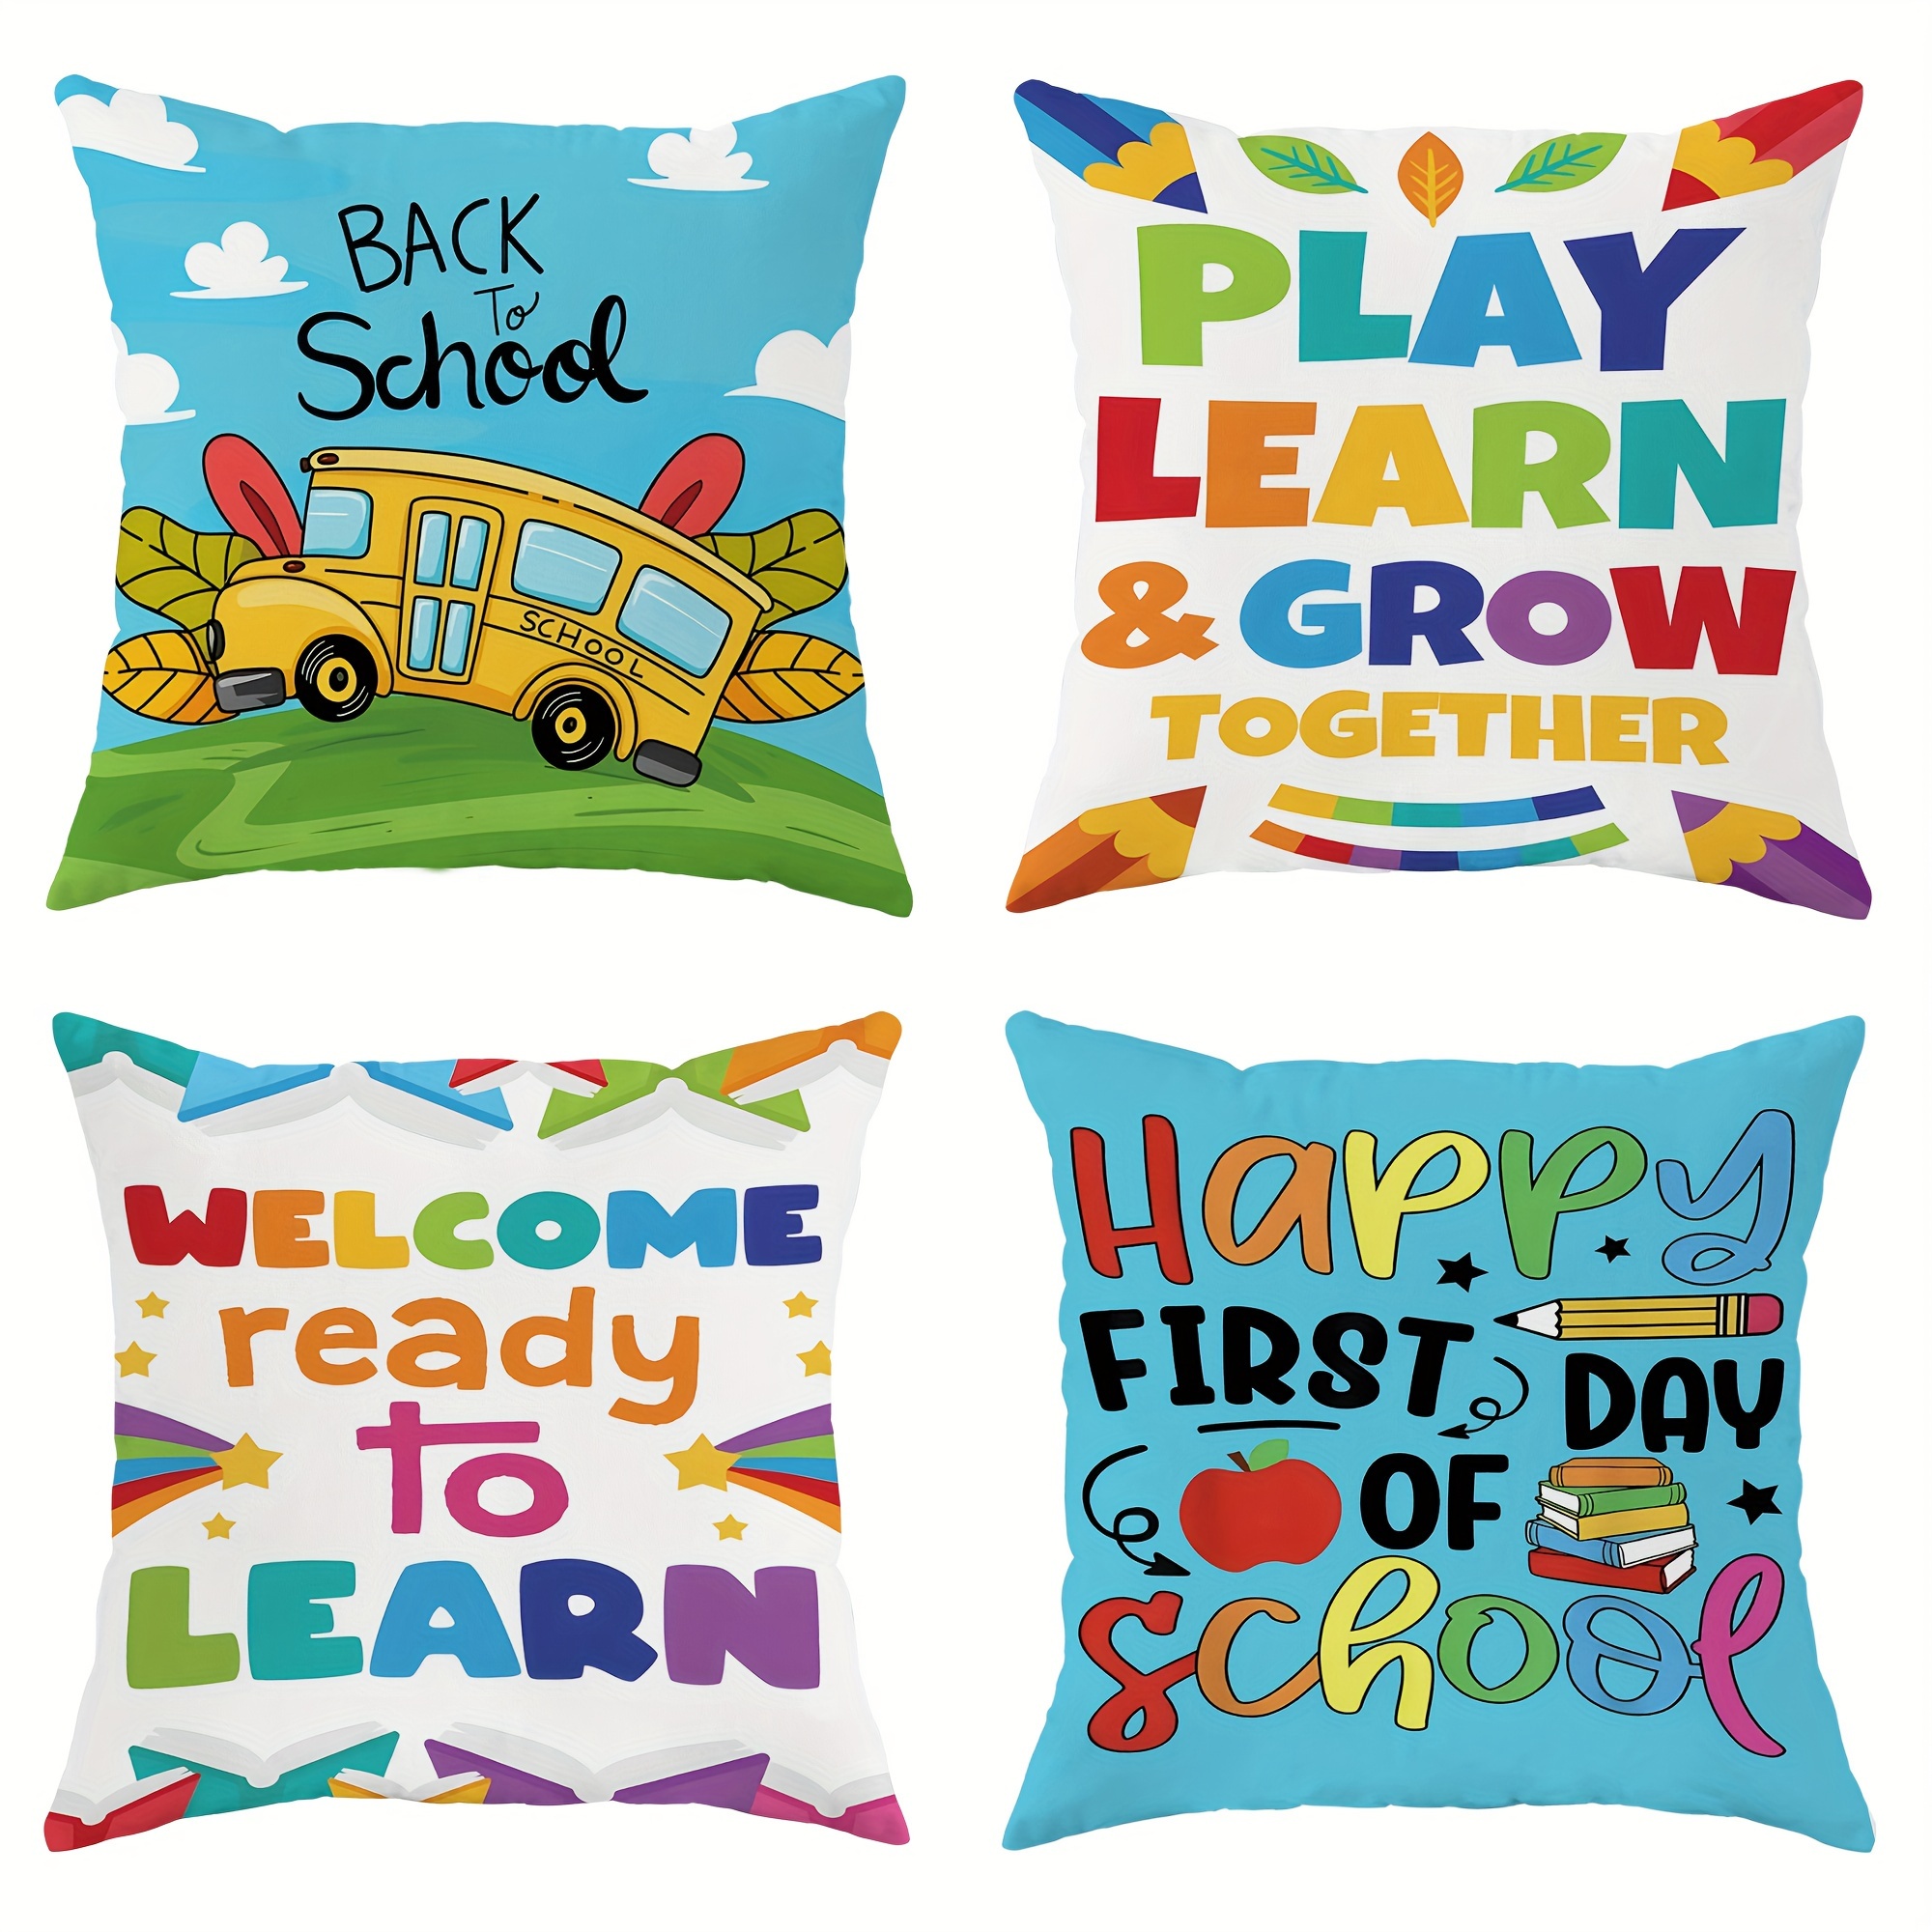 

Set Of 4 Back To School Throw Pillow Covers - Contemporary 18x18 Inch Decorative Cushion Cases With Zipper Closure For Classroom, Teacher, Student Gifts, Machine Washable Polyester, Playful Patterns